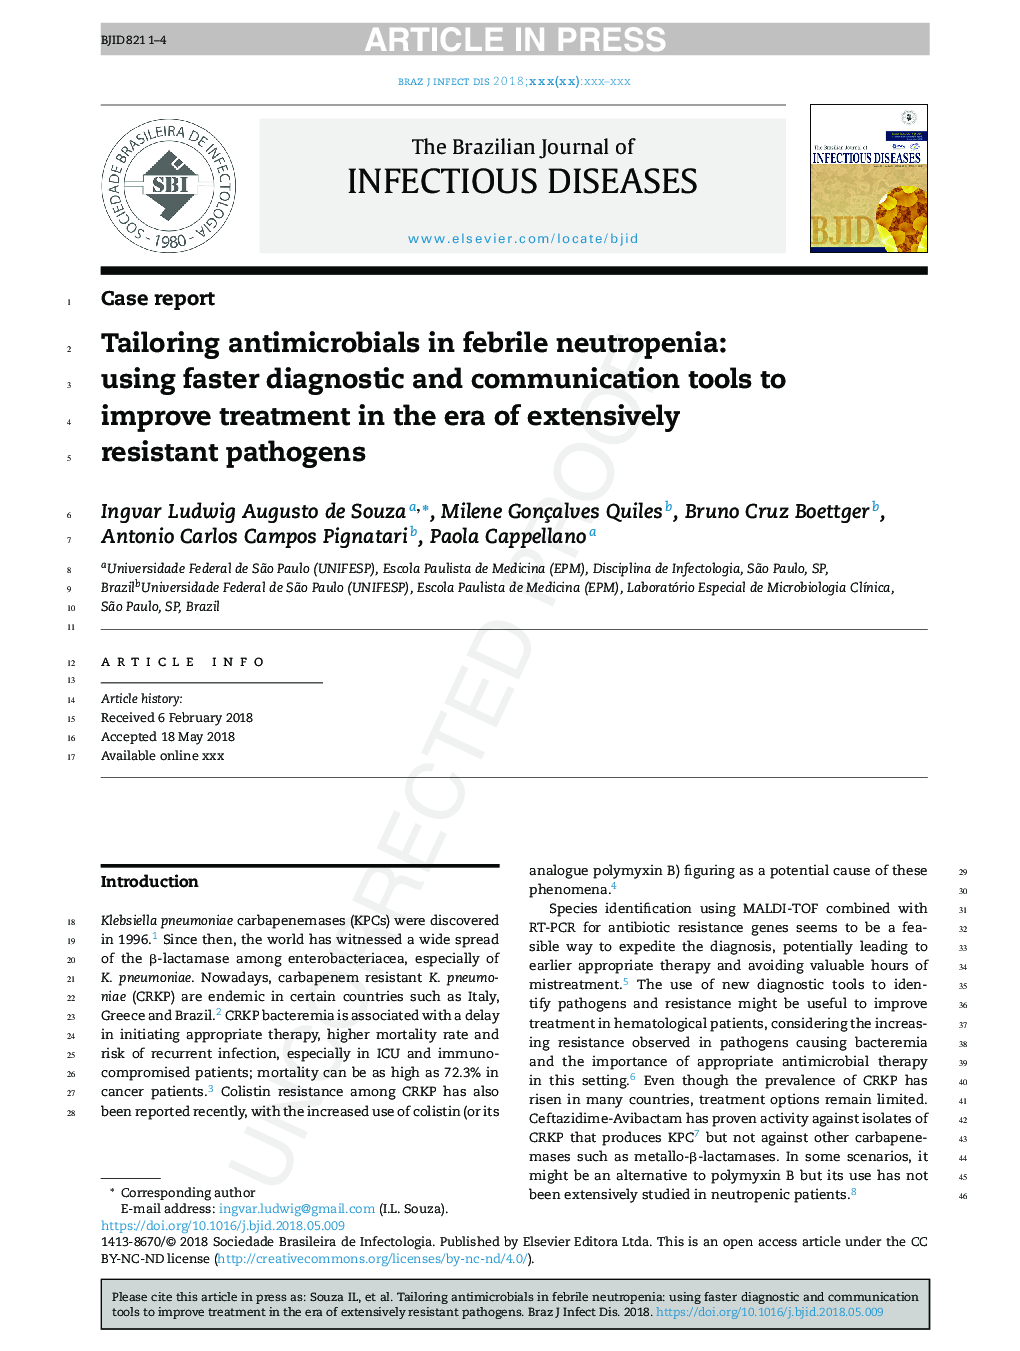 Tailoring antimicrobials in febrile neutropenia: using faster diagnostic and communication tools to improve treatment in the era of extensively resistant pathogens